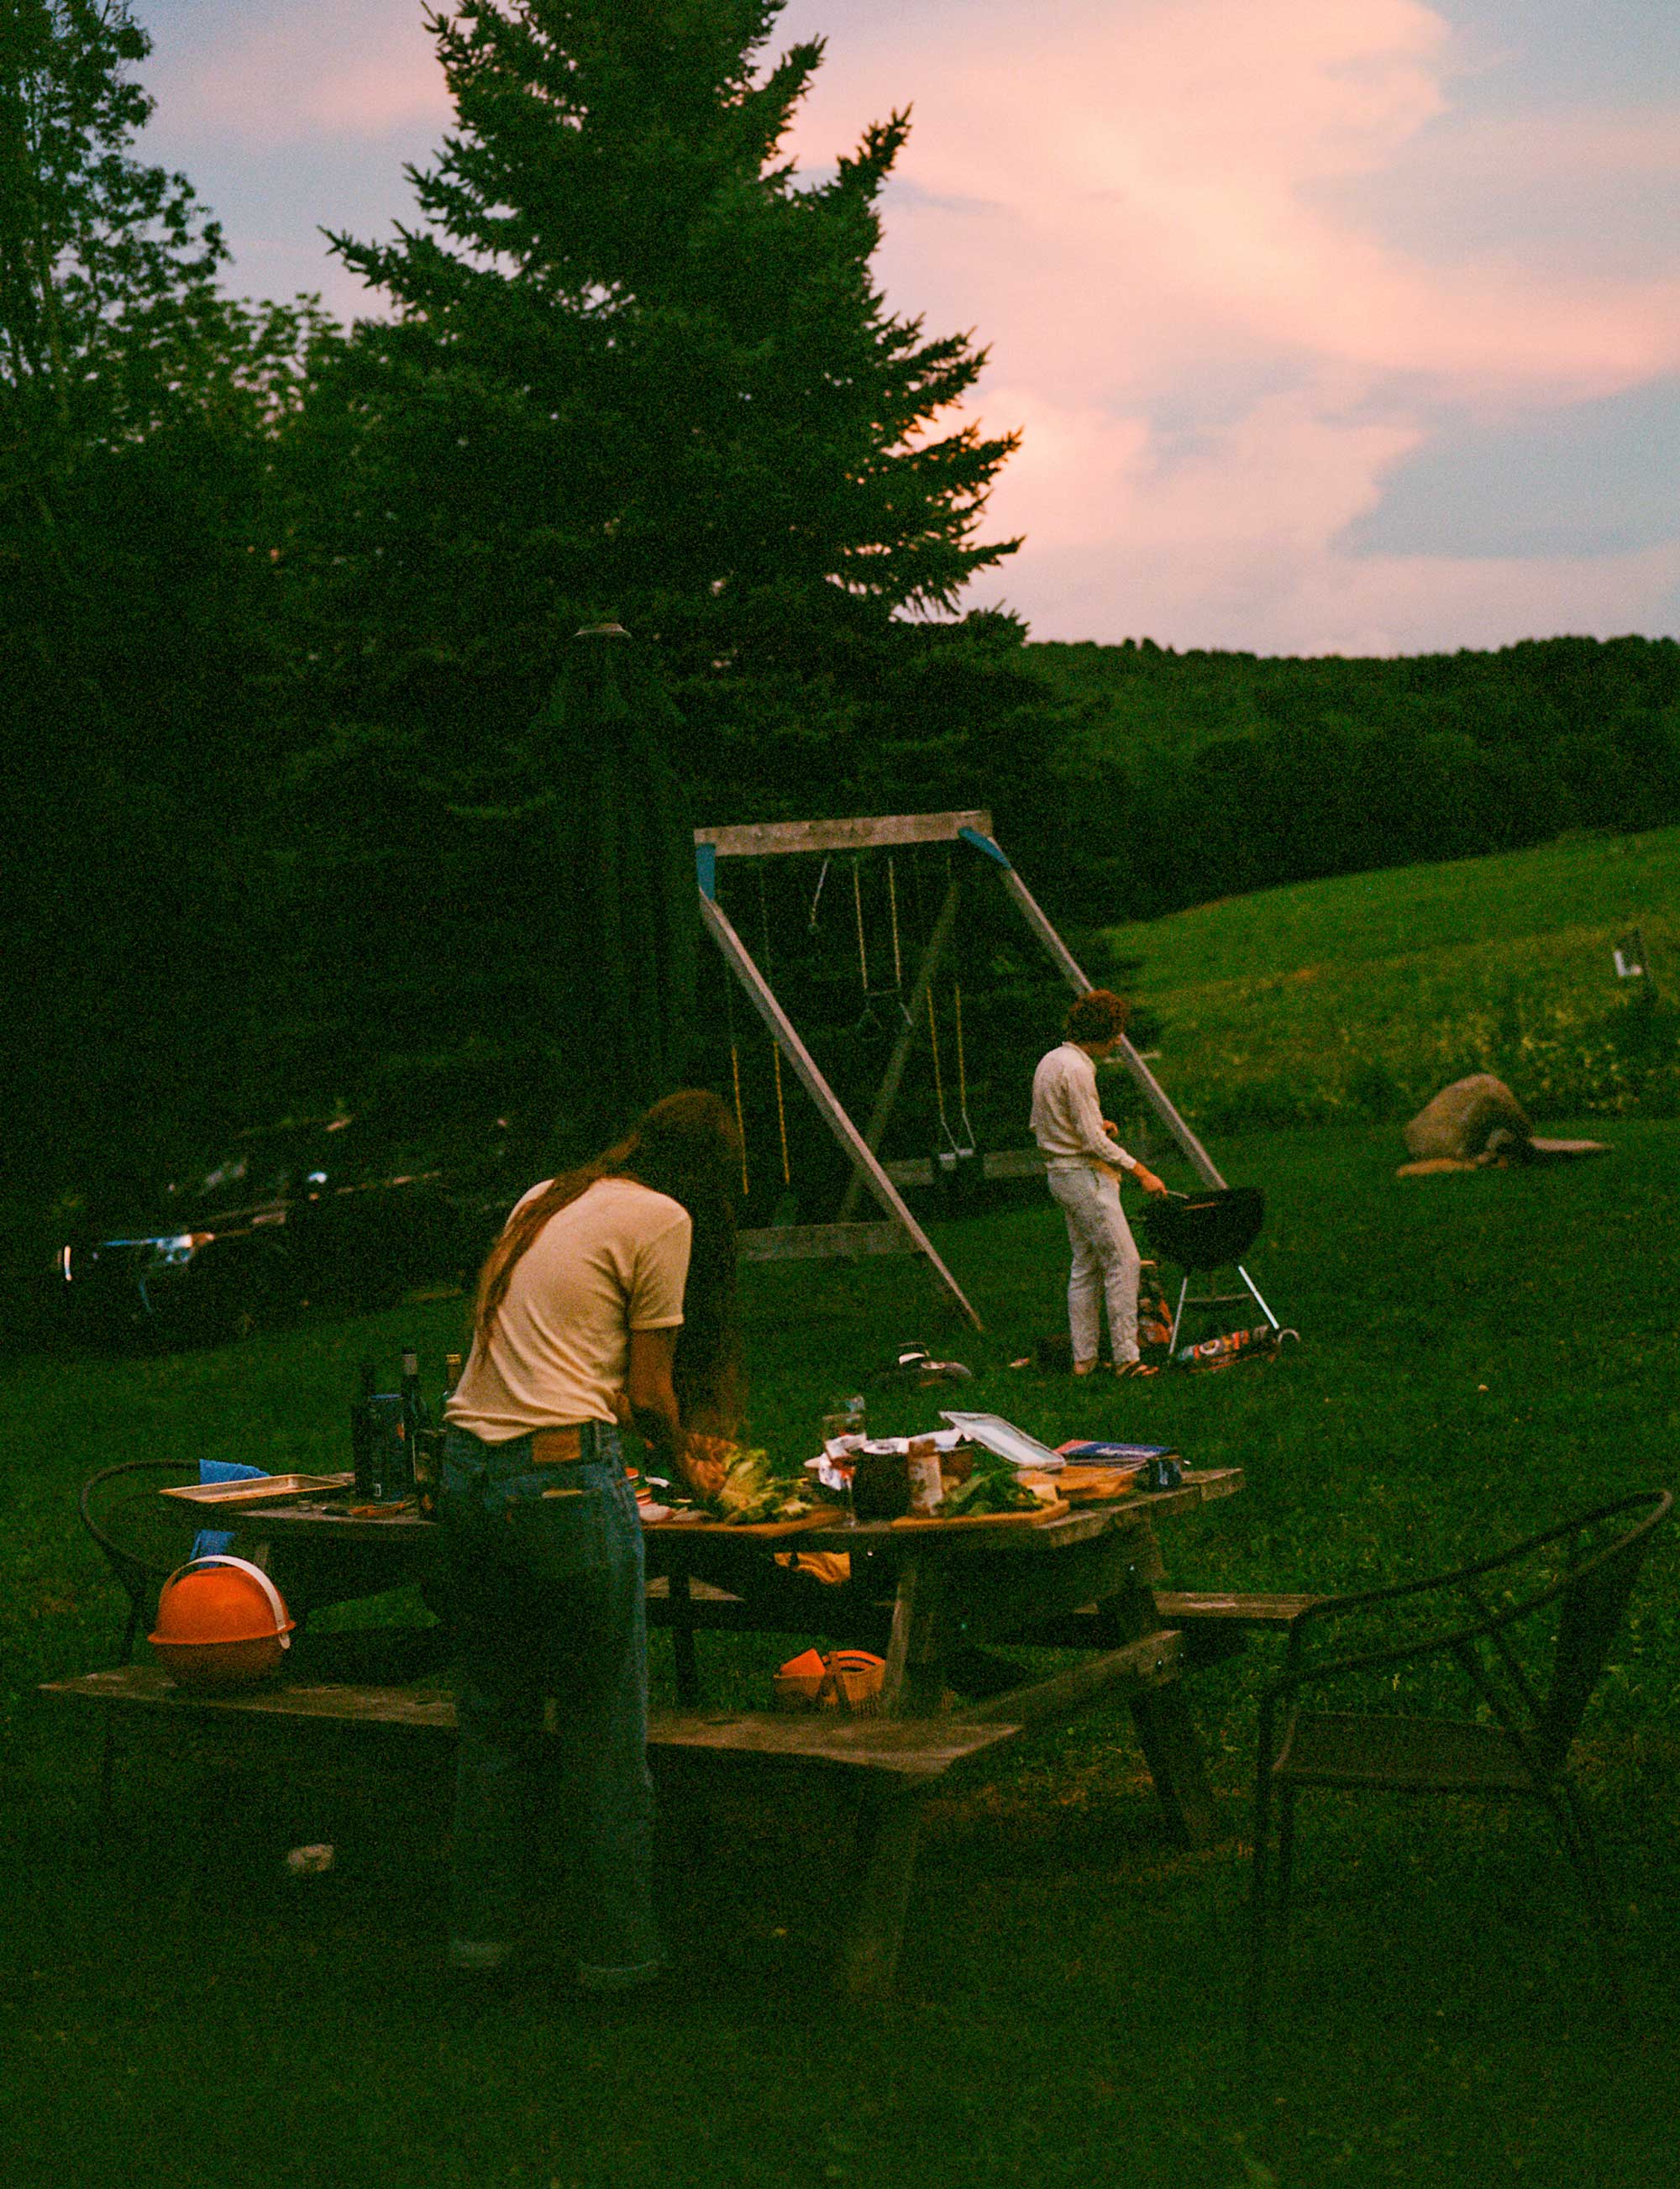 People prepare a meal outdoors at sunset, at a grill and picnic table.